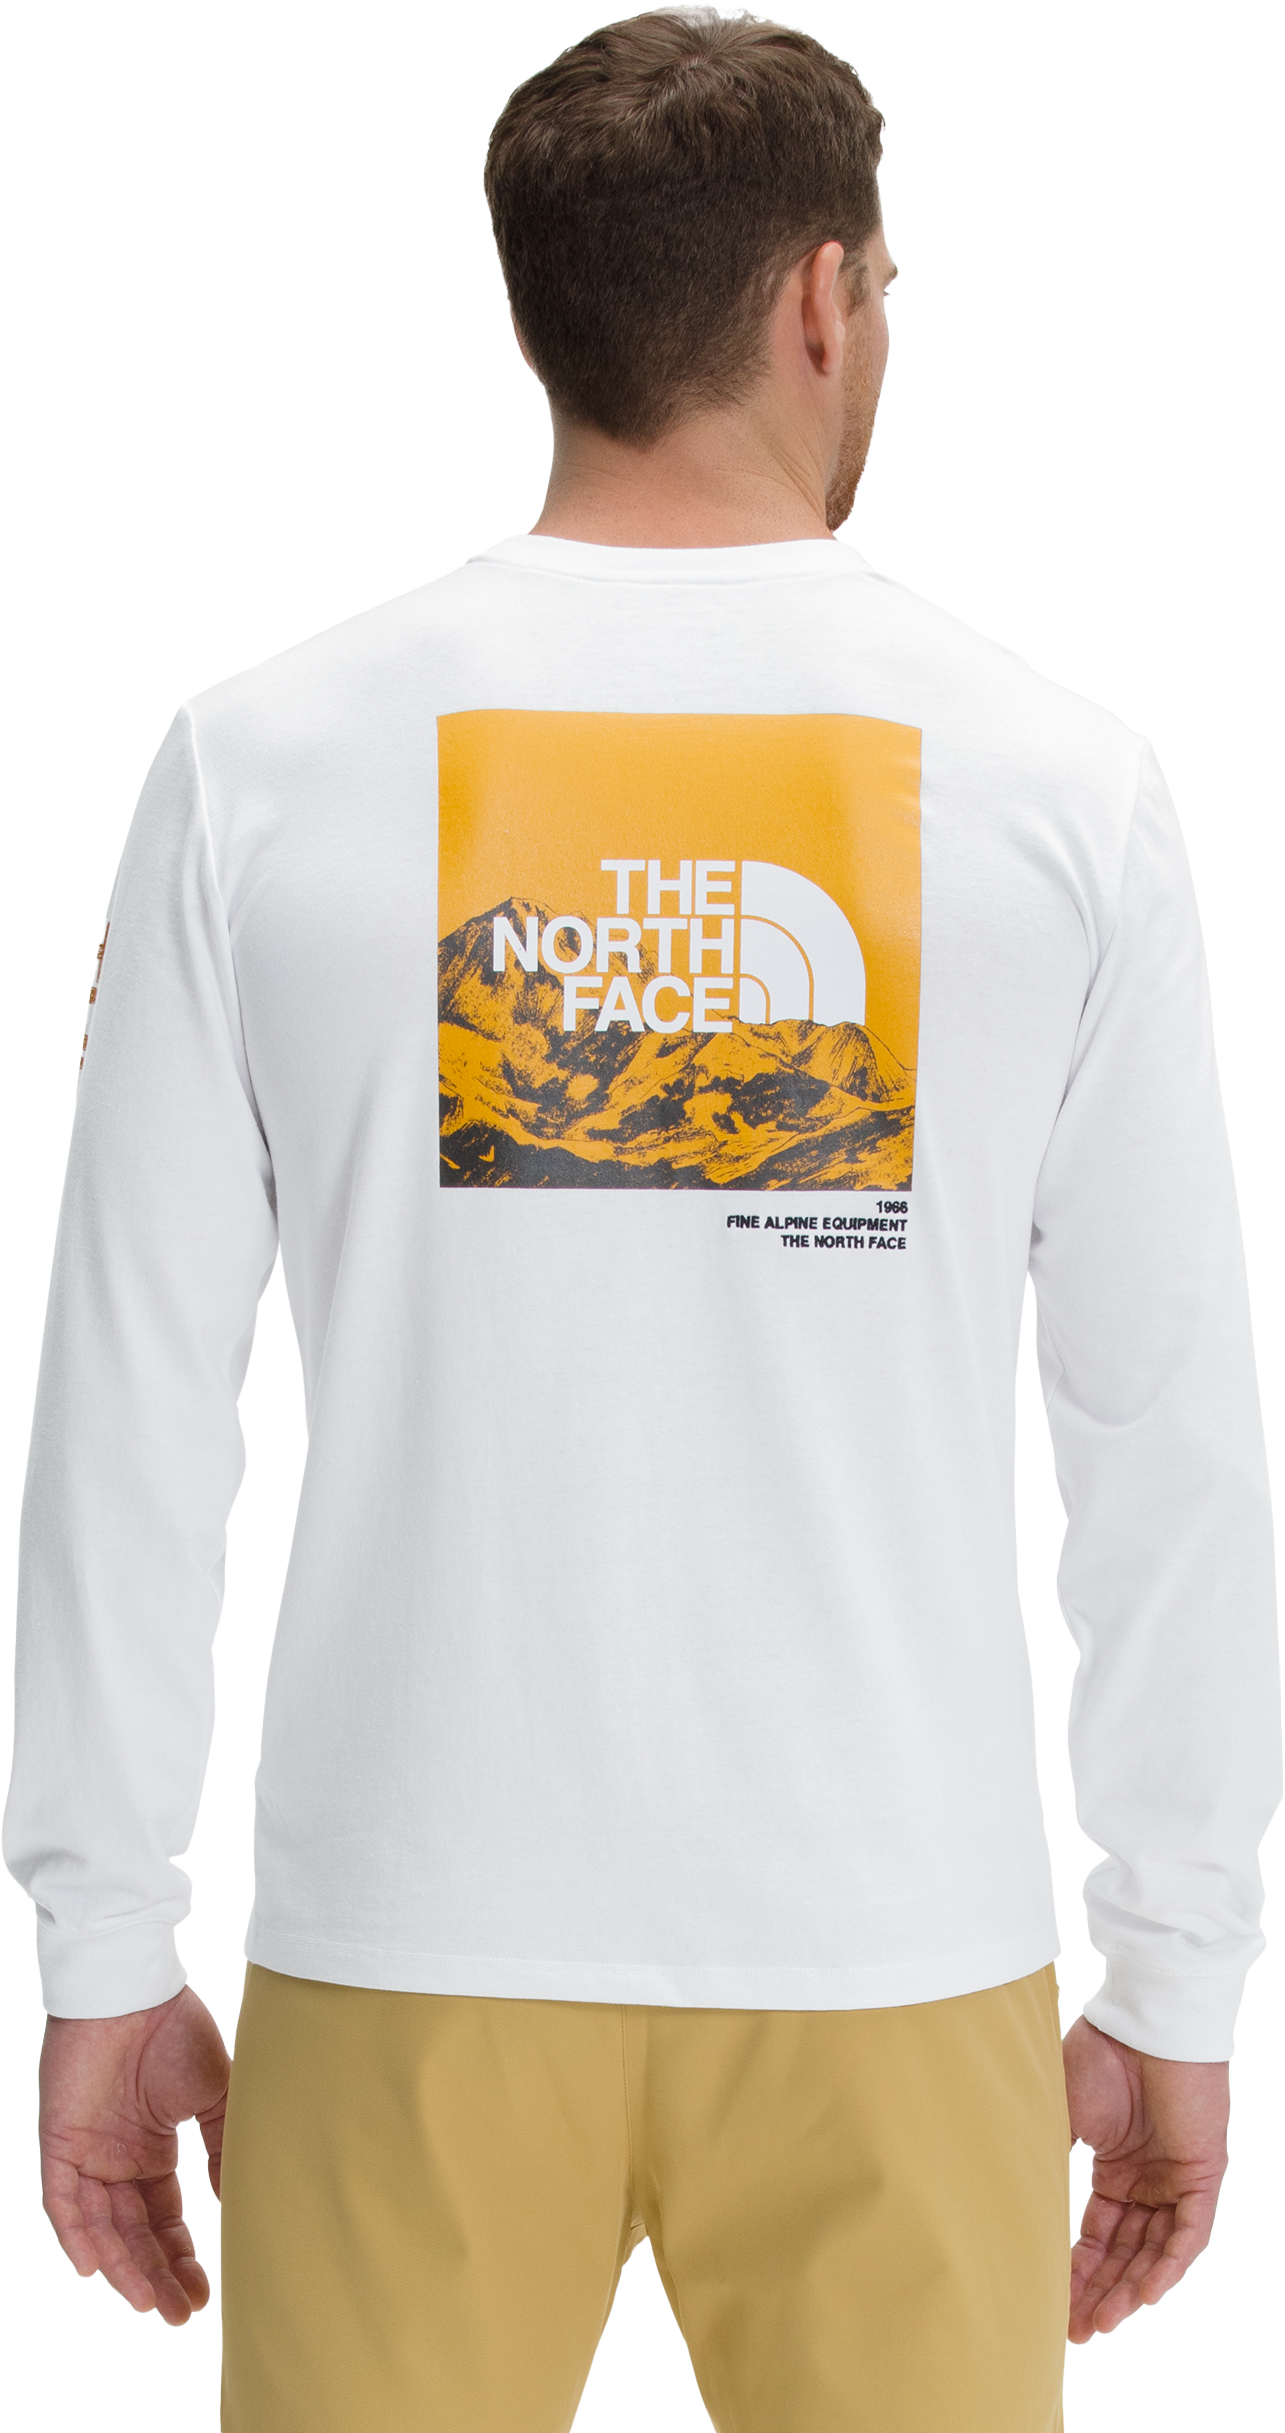 The North Face Logo Play Long-Sleeve T-Shirt for Men - TNF White - S